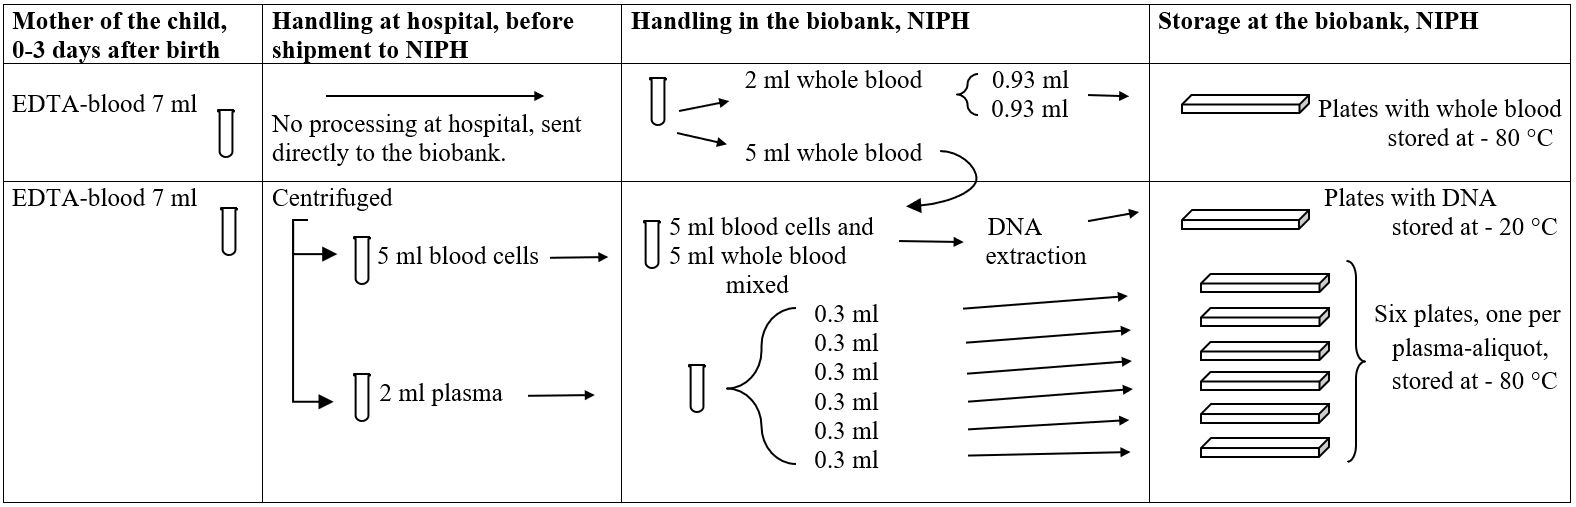 Figure 4. Flow chart of the process from MoBa sample collection to storage of the different specimen at the biobank. This chart shows the process for samples collected from the mothers taken 0 – 3 days after birth. 